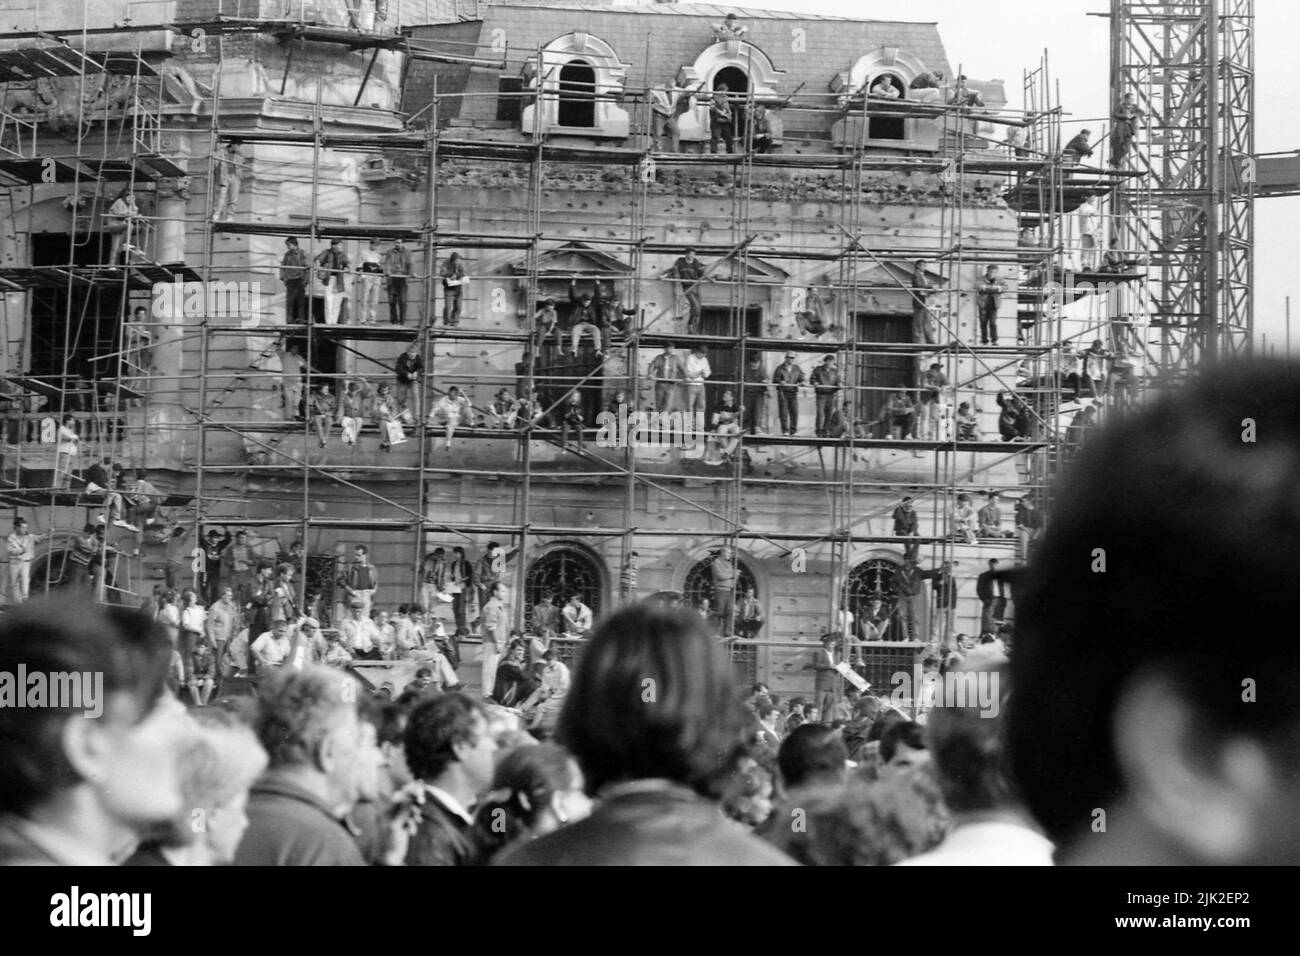 Bucharest, Romania, September 1992. Political rally organized by Romanian Democratic Convention (CDR) before the presidential elections of 1992. Huge crowd in the Revolution Square, with many people standing on the scaffolding used on the buildings damaged in the revolution of 1989. Stock Photo